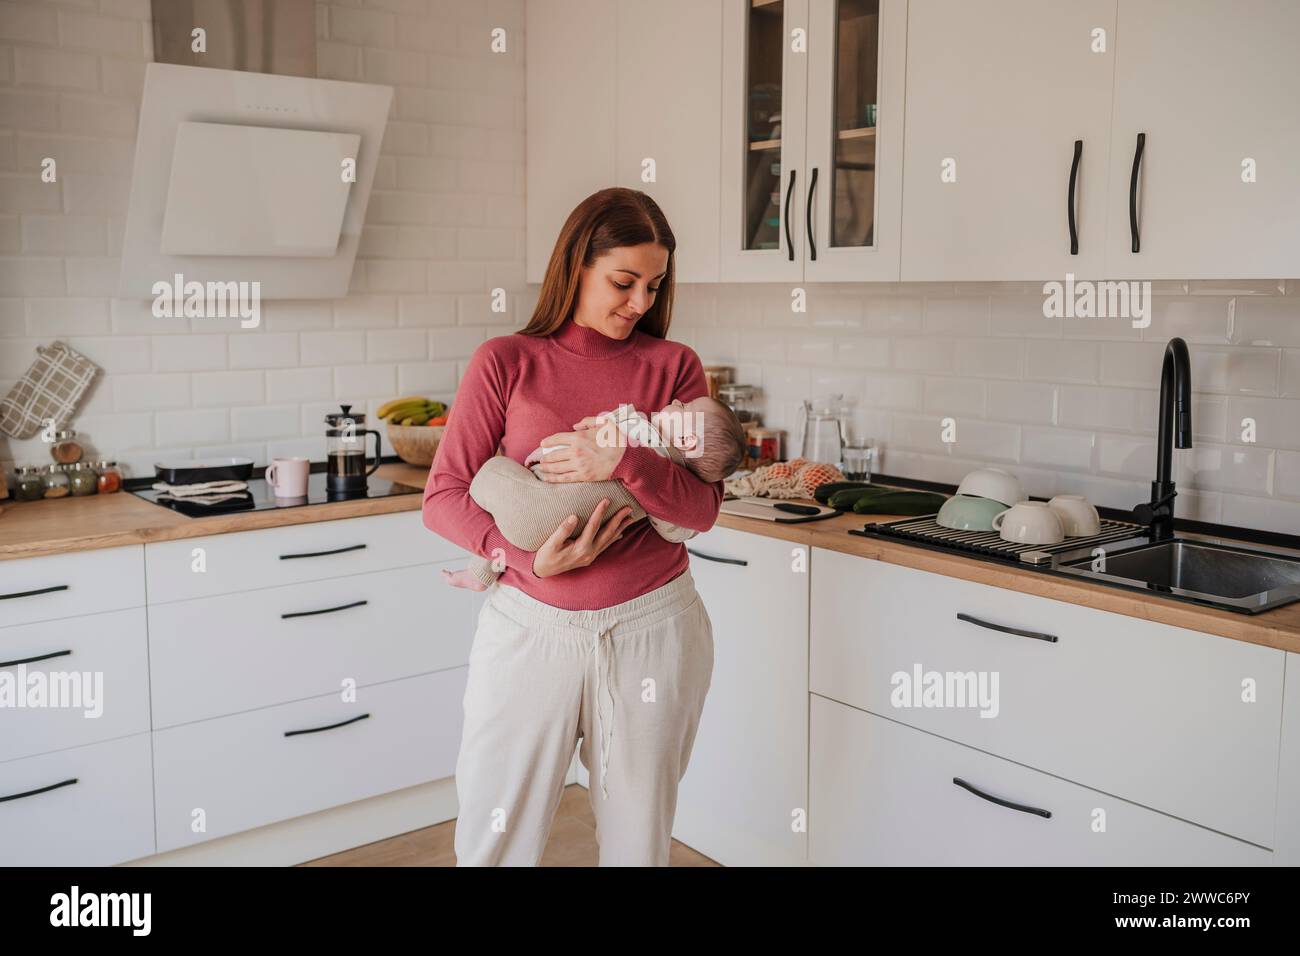 Smiling woman standing with baby daughter in kitchen Stock Photo